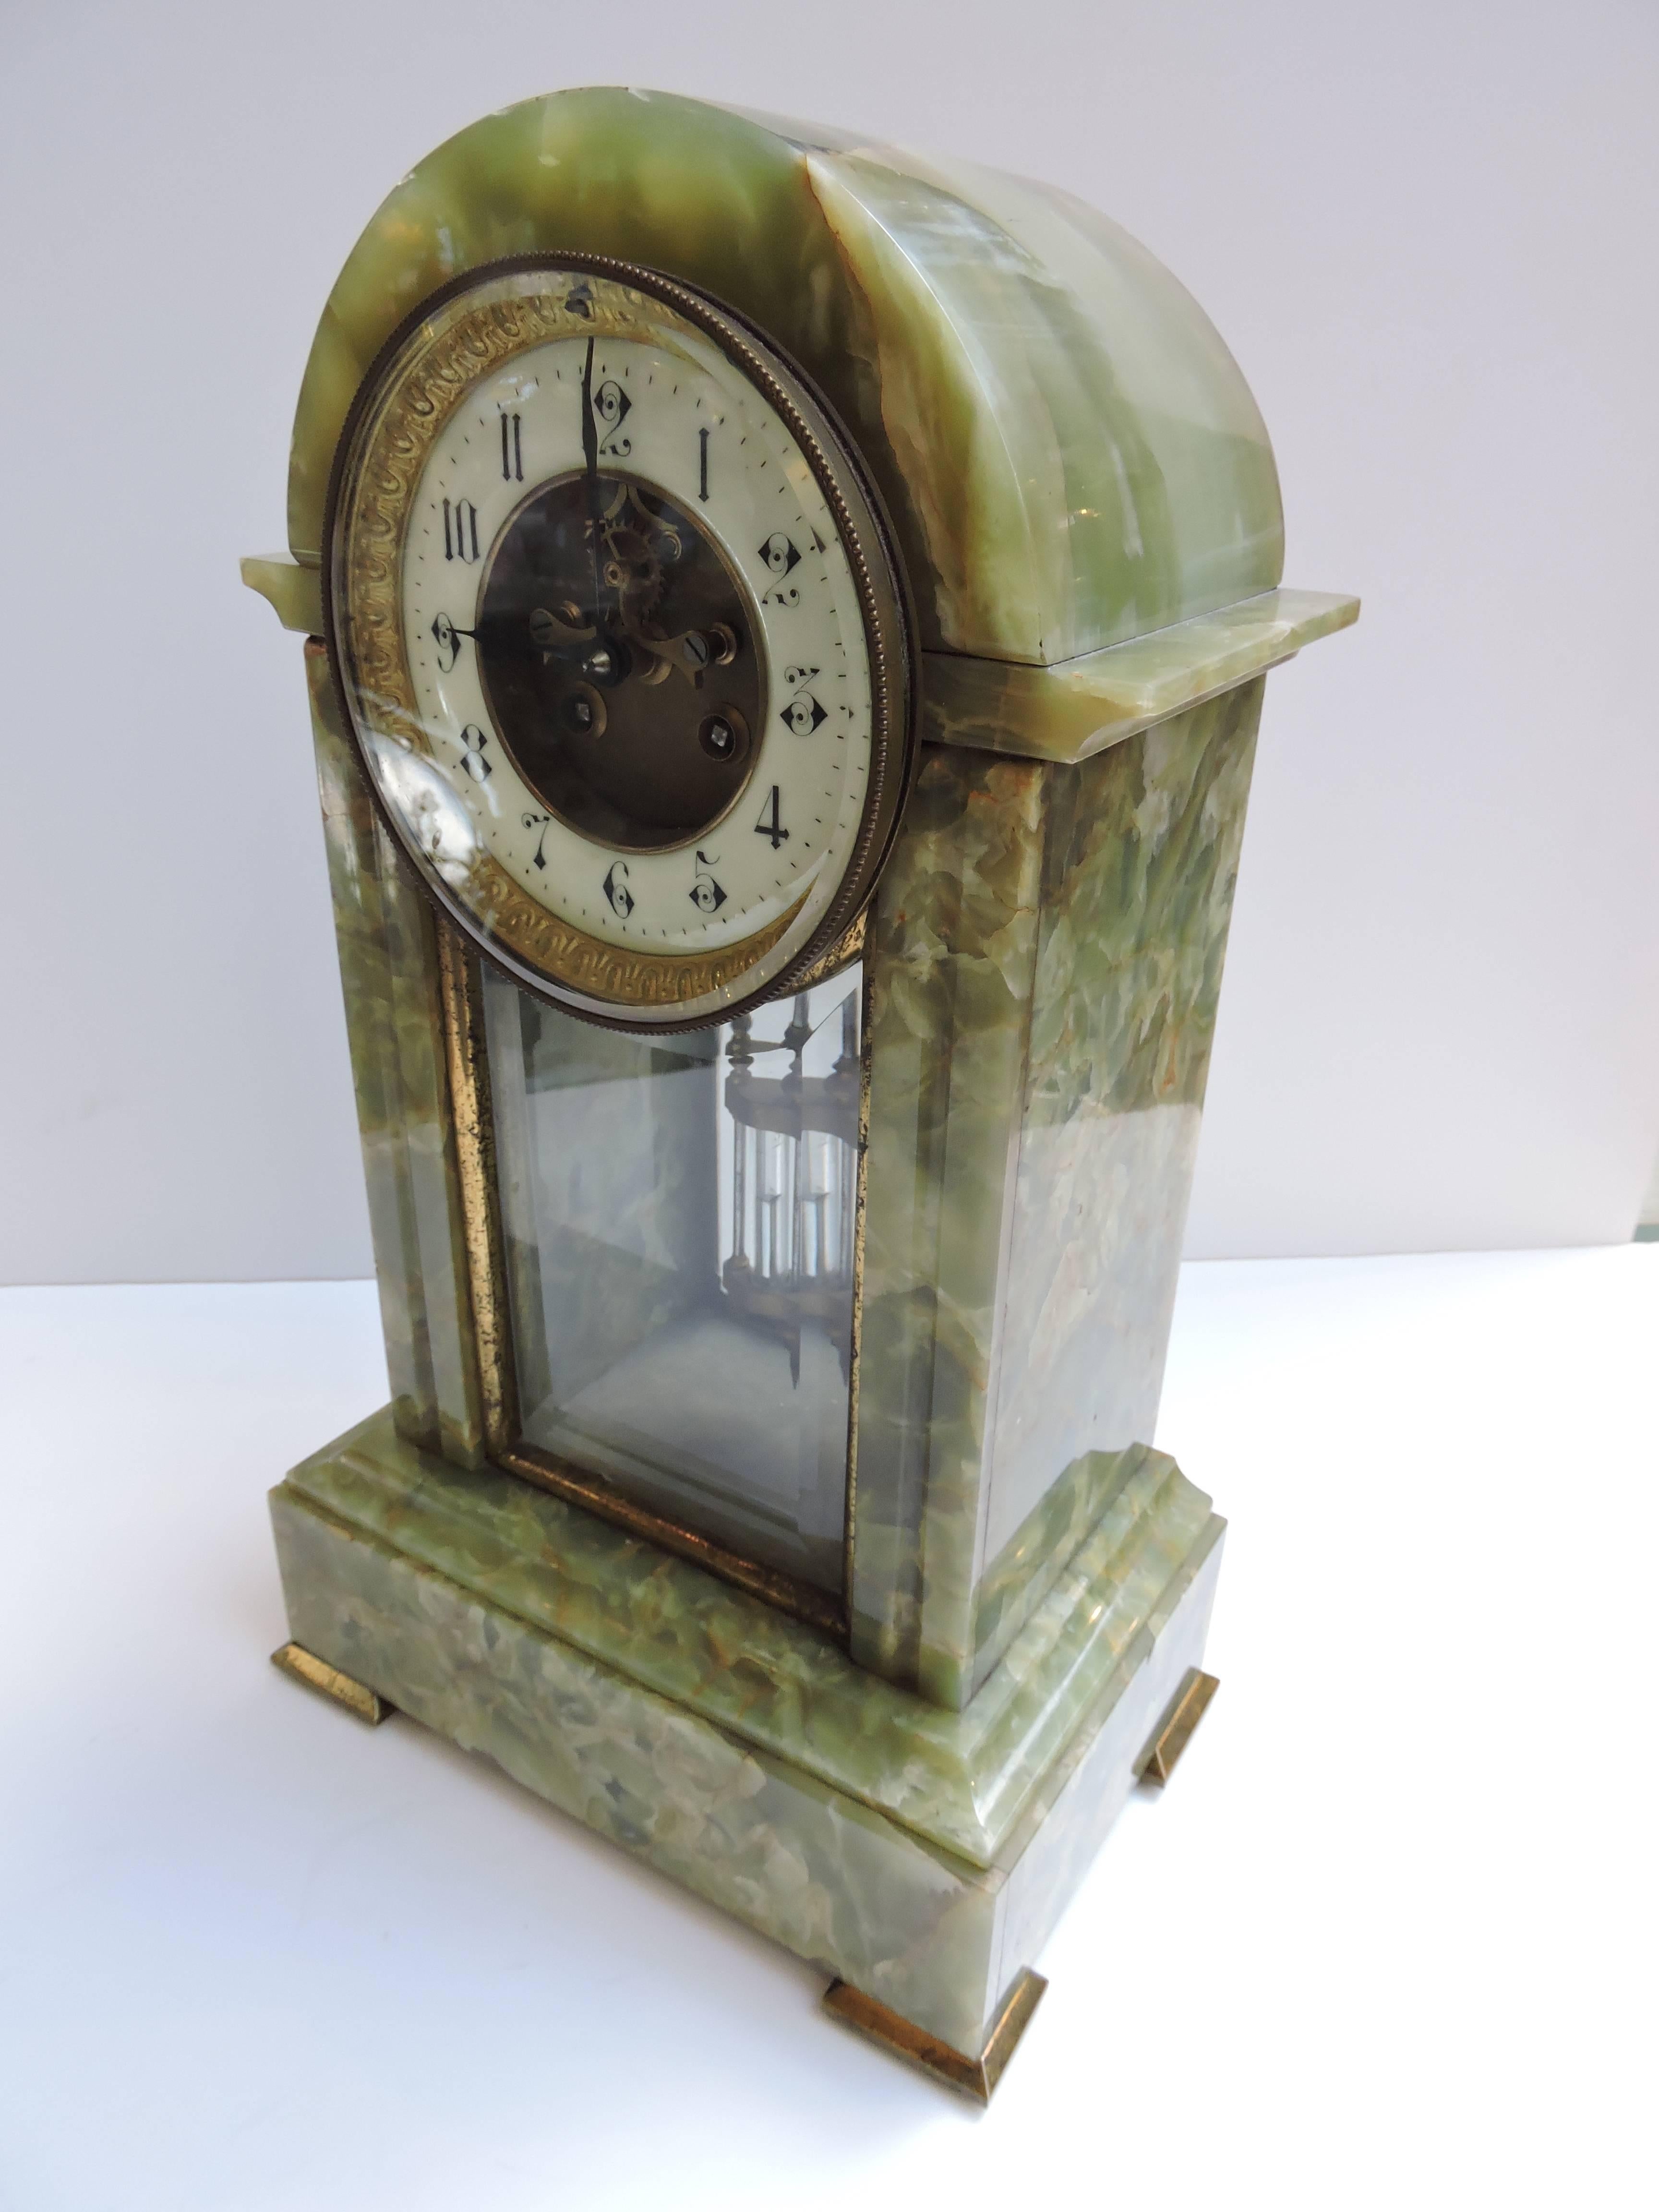 A lovely shaped French clock in a translucent green onyx stone. Glass front and back which displays the mercury pendulum. Chimes on the hour and half hour. 

The face has a glass covering and also shows the a partial skeleton movement in the